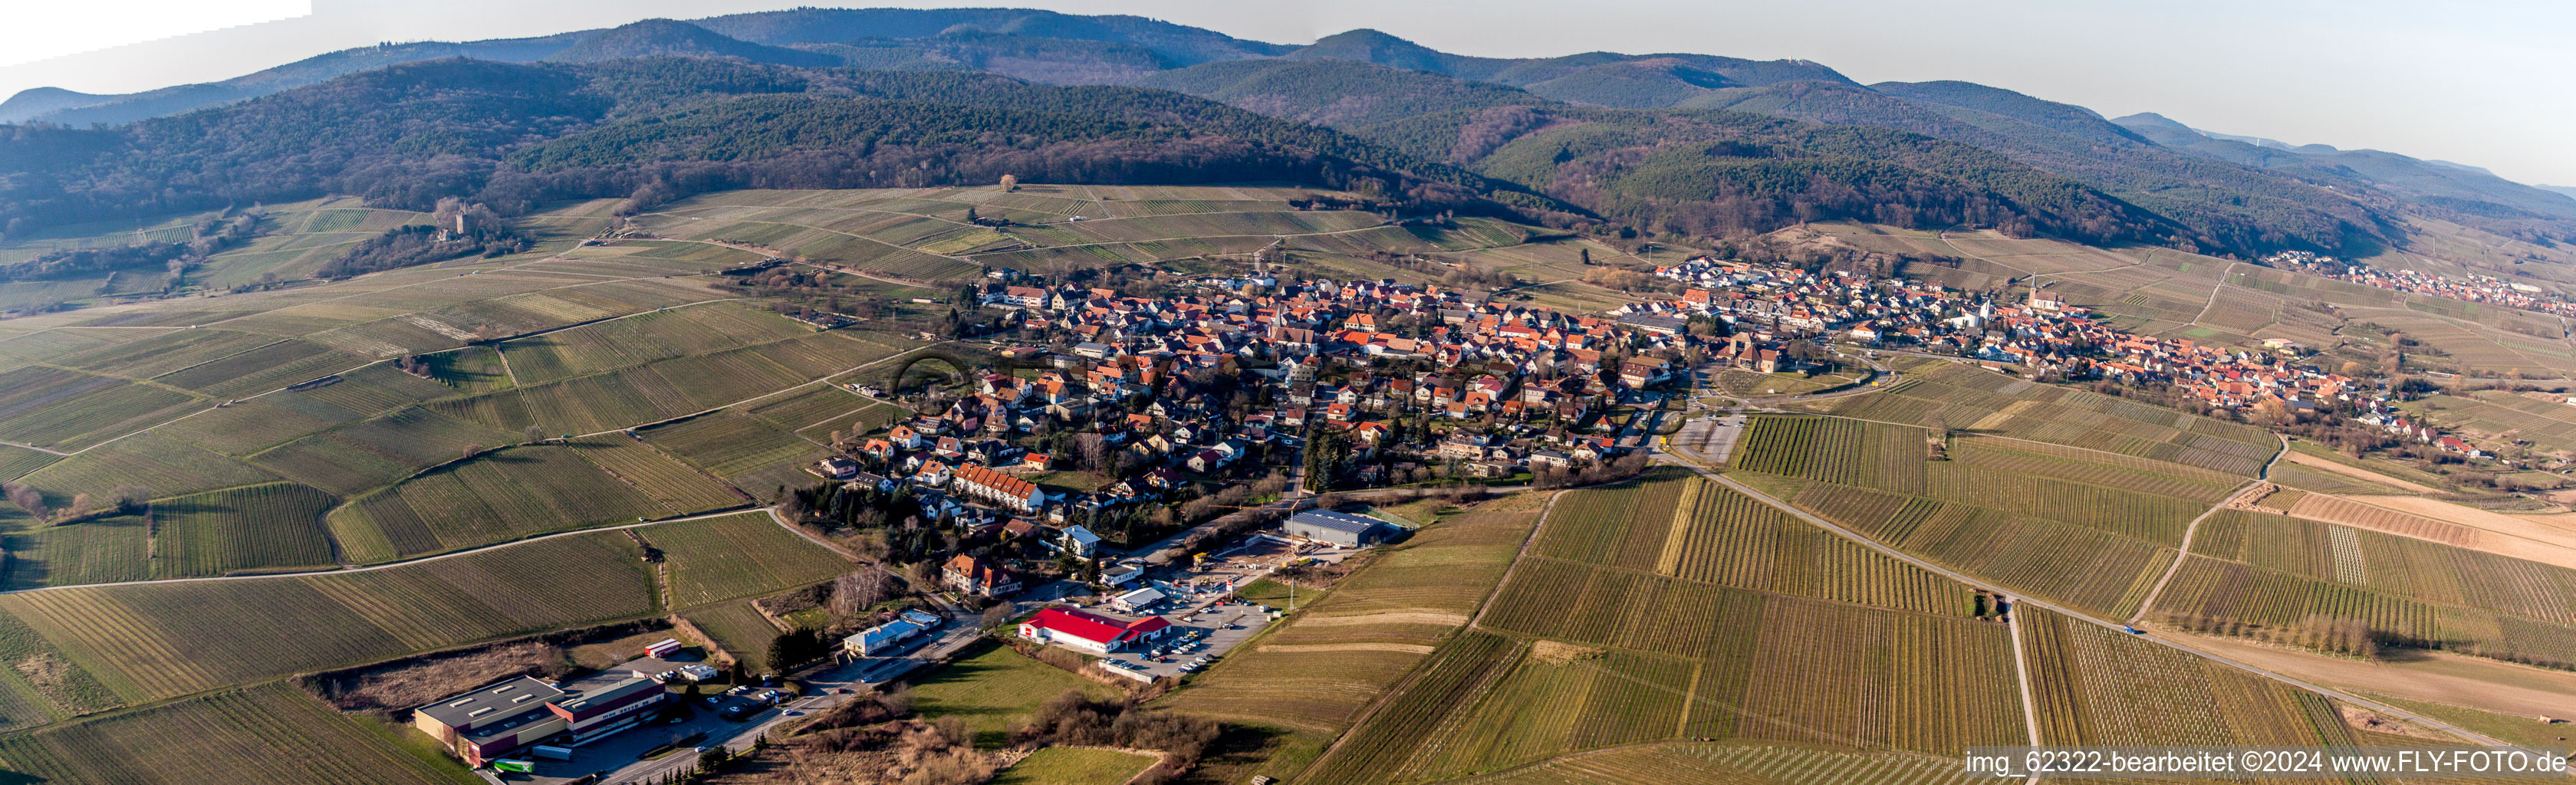 Oblique view of Village - view on the edge of wine yards in Schweigen in the state Rhineland-Palatinate, Germany